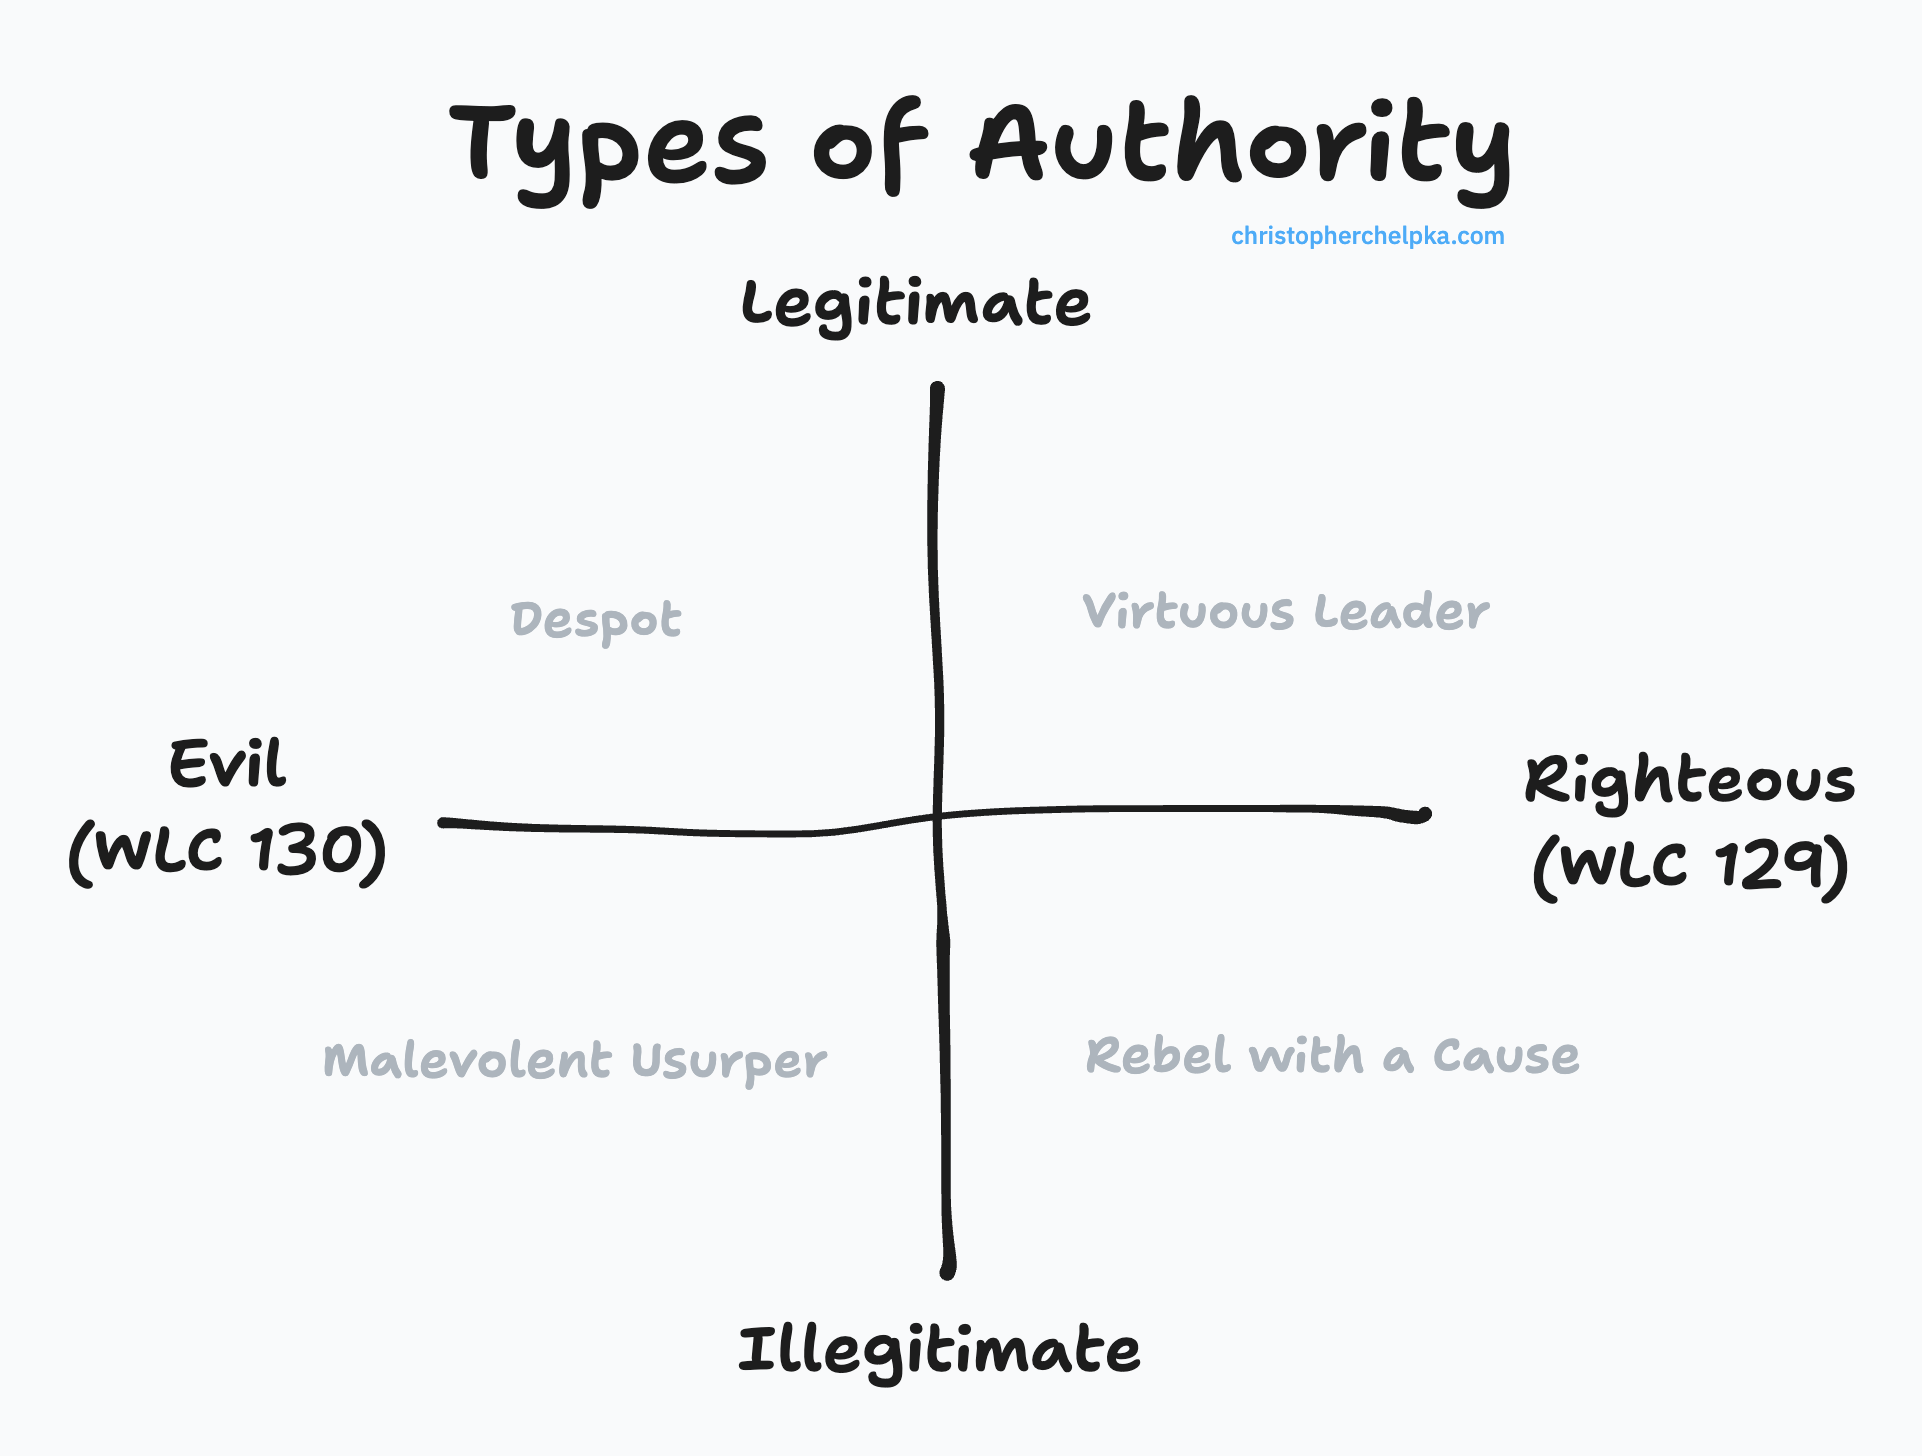 A 2X2 diagram categorizing types of authority into four quadrants with two axes labeled 'Evil to Righteous' and 'Illegitimate to Legitimate.'